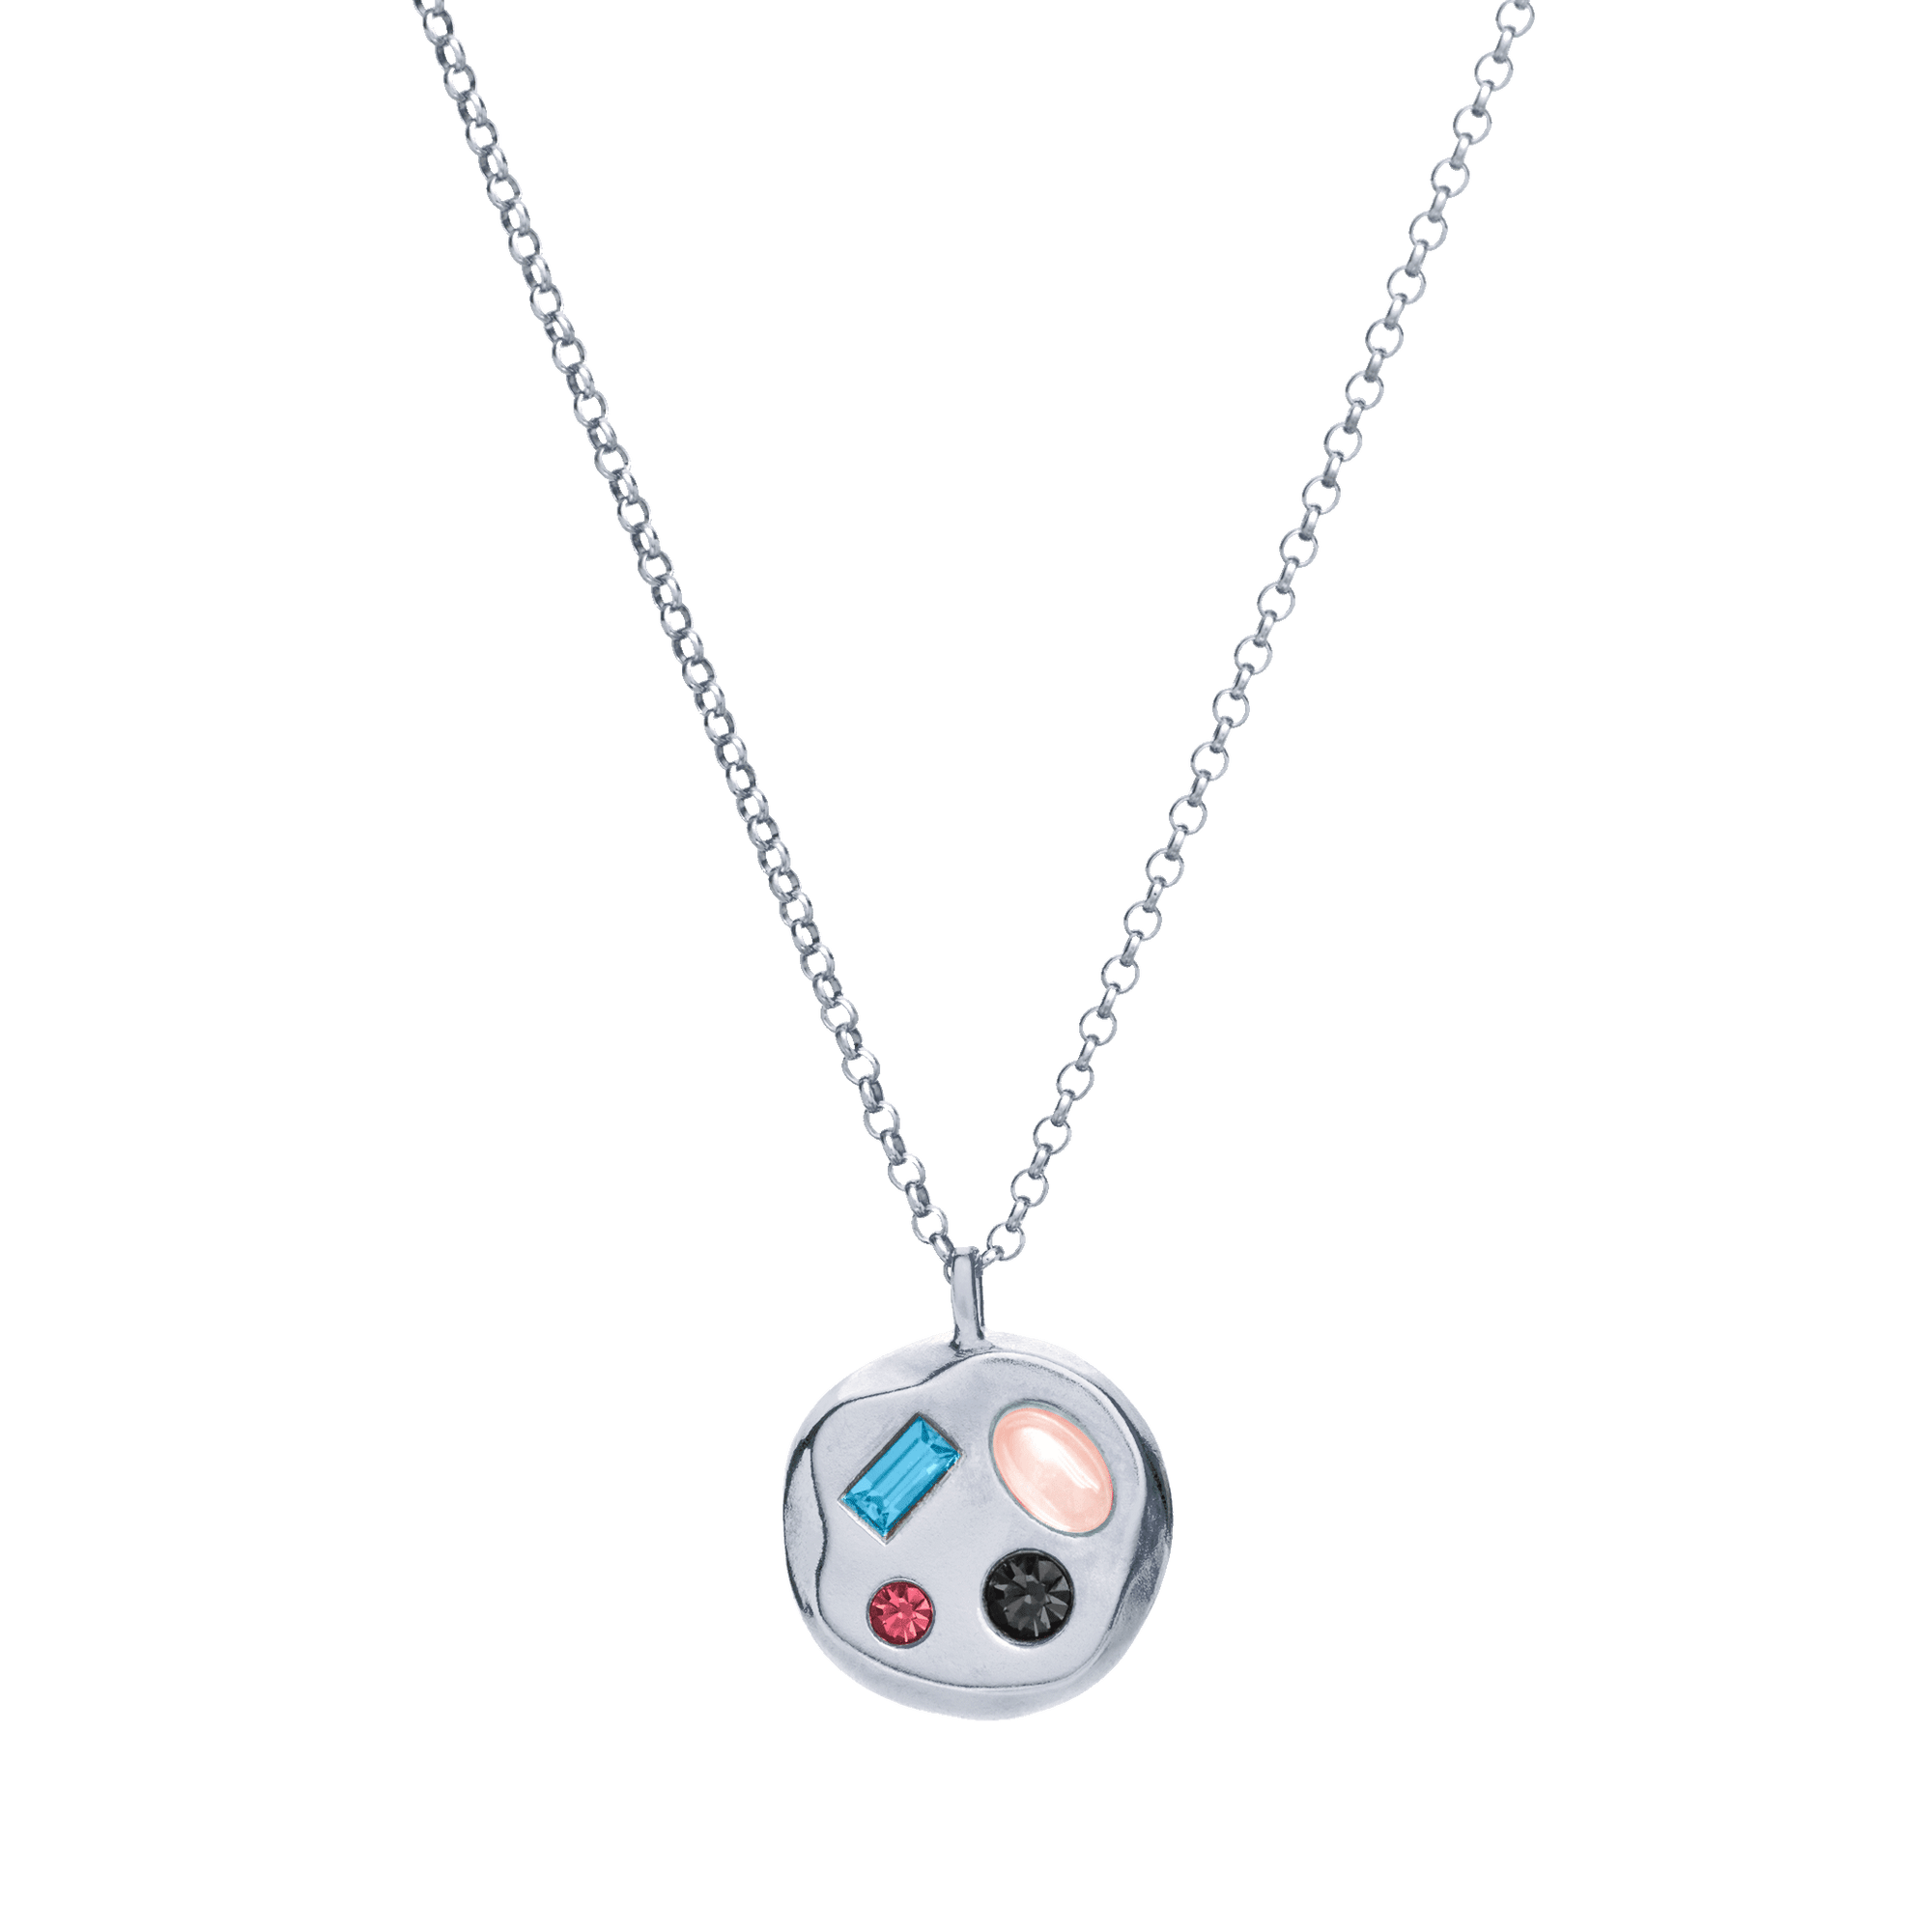 The December Eleventh Pendant in Sterling Silver